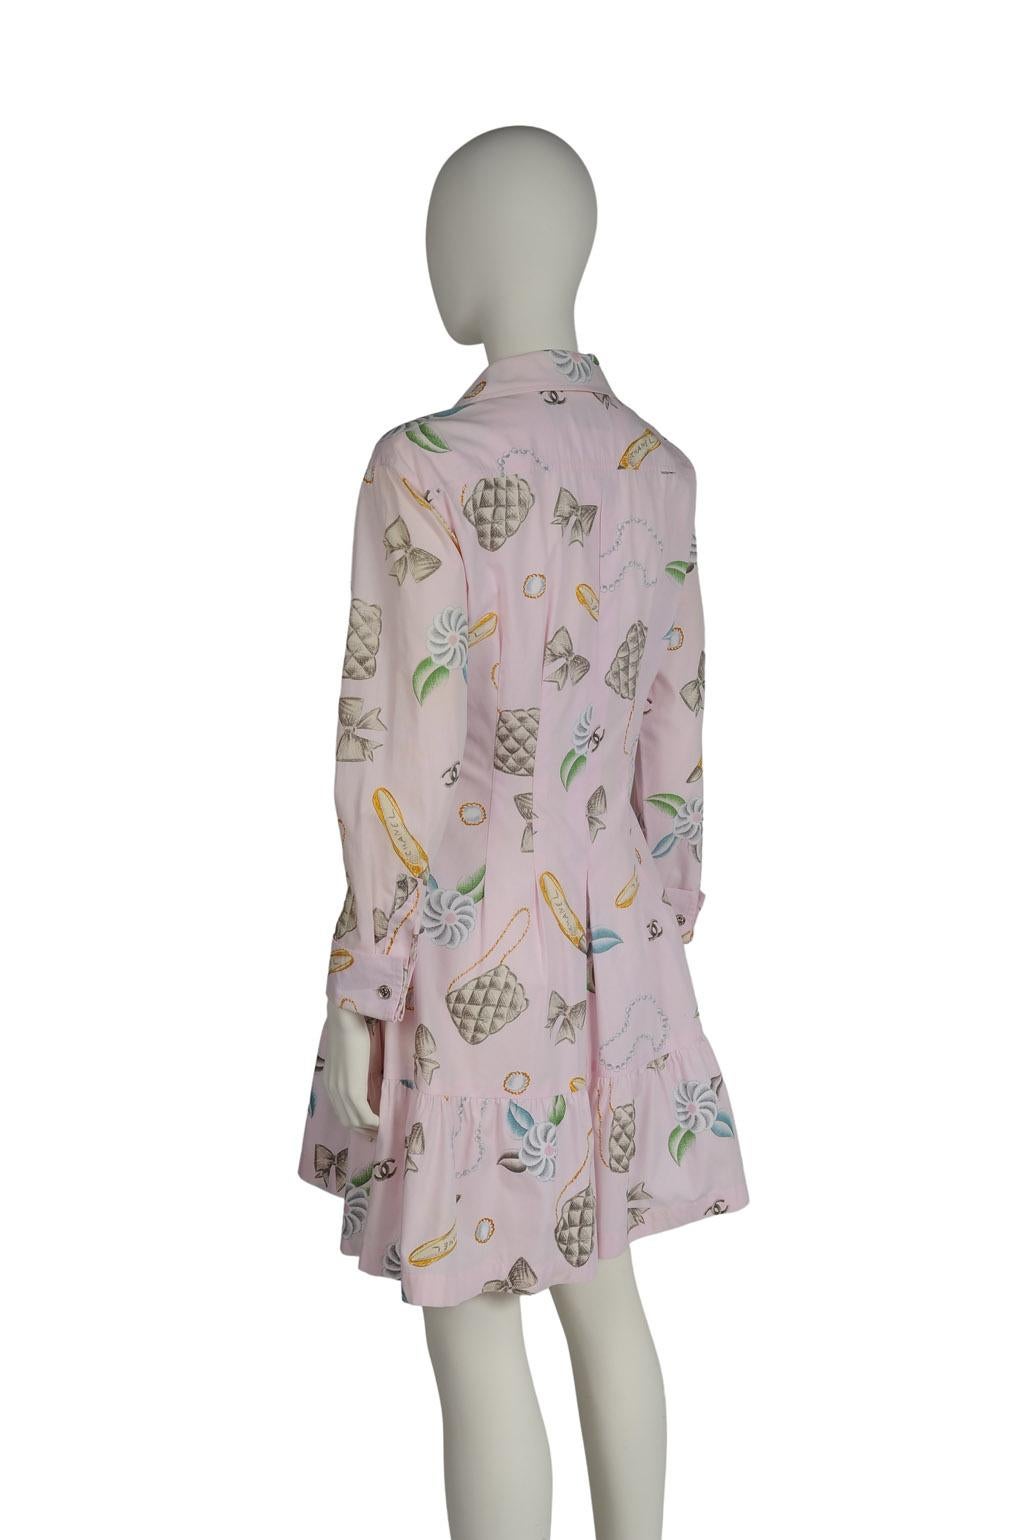 Chanel By Karl Lagerfeld Runway Bow Print Shirt Dress, Spring-Summer 1996 For Sale 6